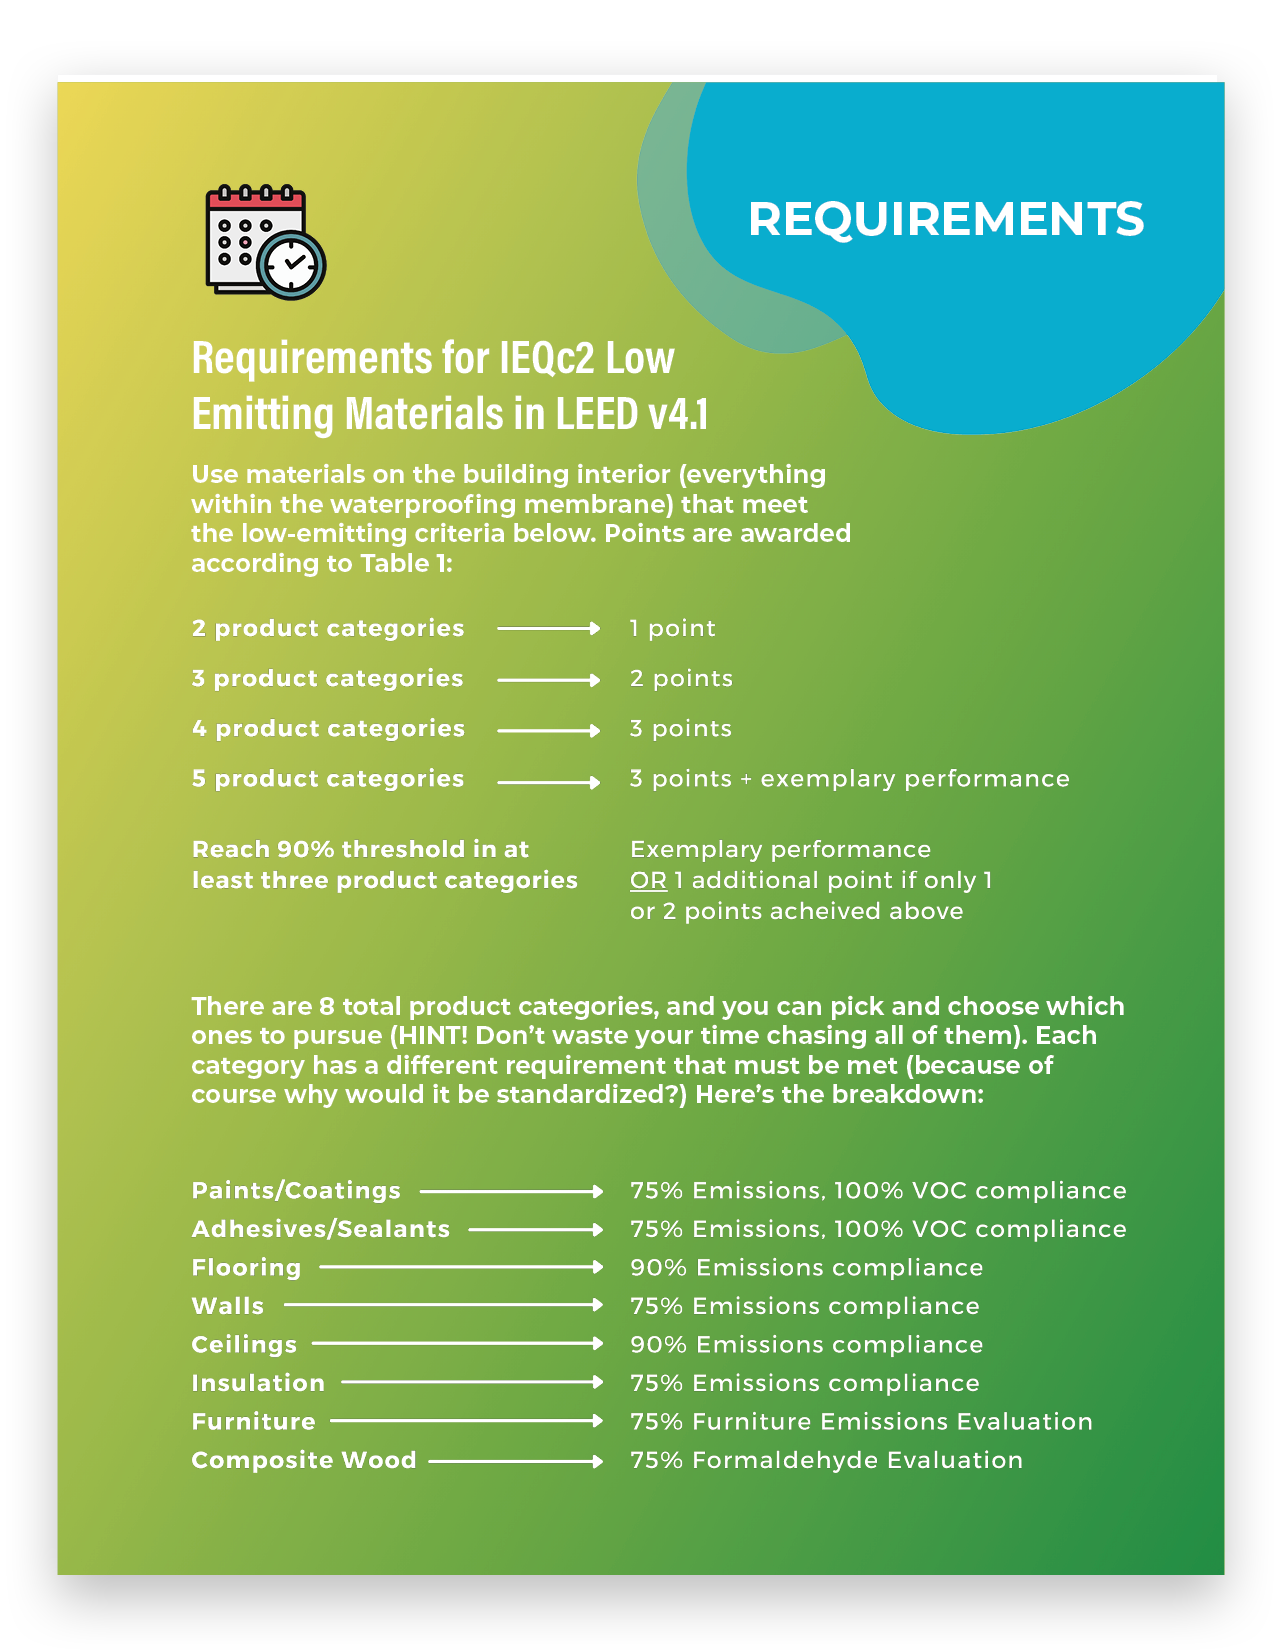 LEED IEQc2 Low Emitting Materials requirements